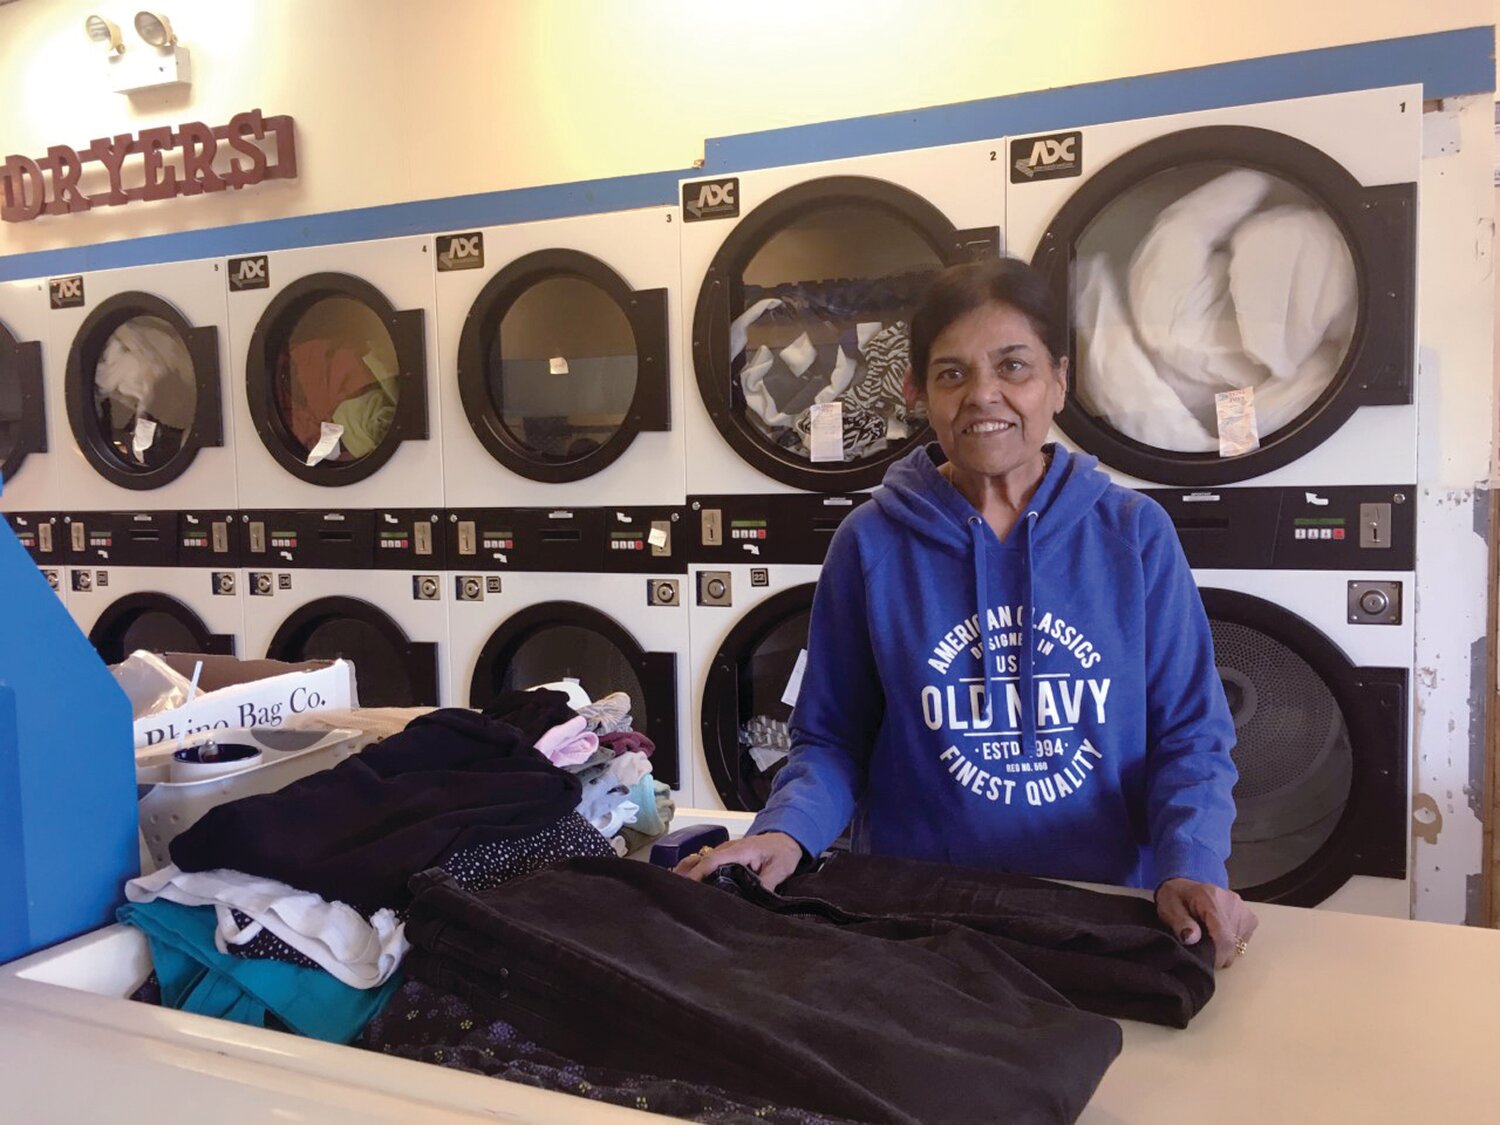 Meet Kaushal Jain, someone who will make your life easier and who will give you more time to do the things you love this spring!  Visit her at Jain’s Laundry on Putnam Pike!